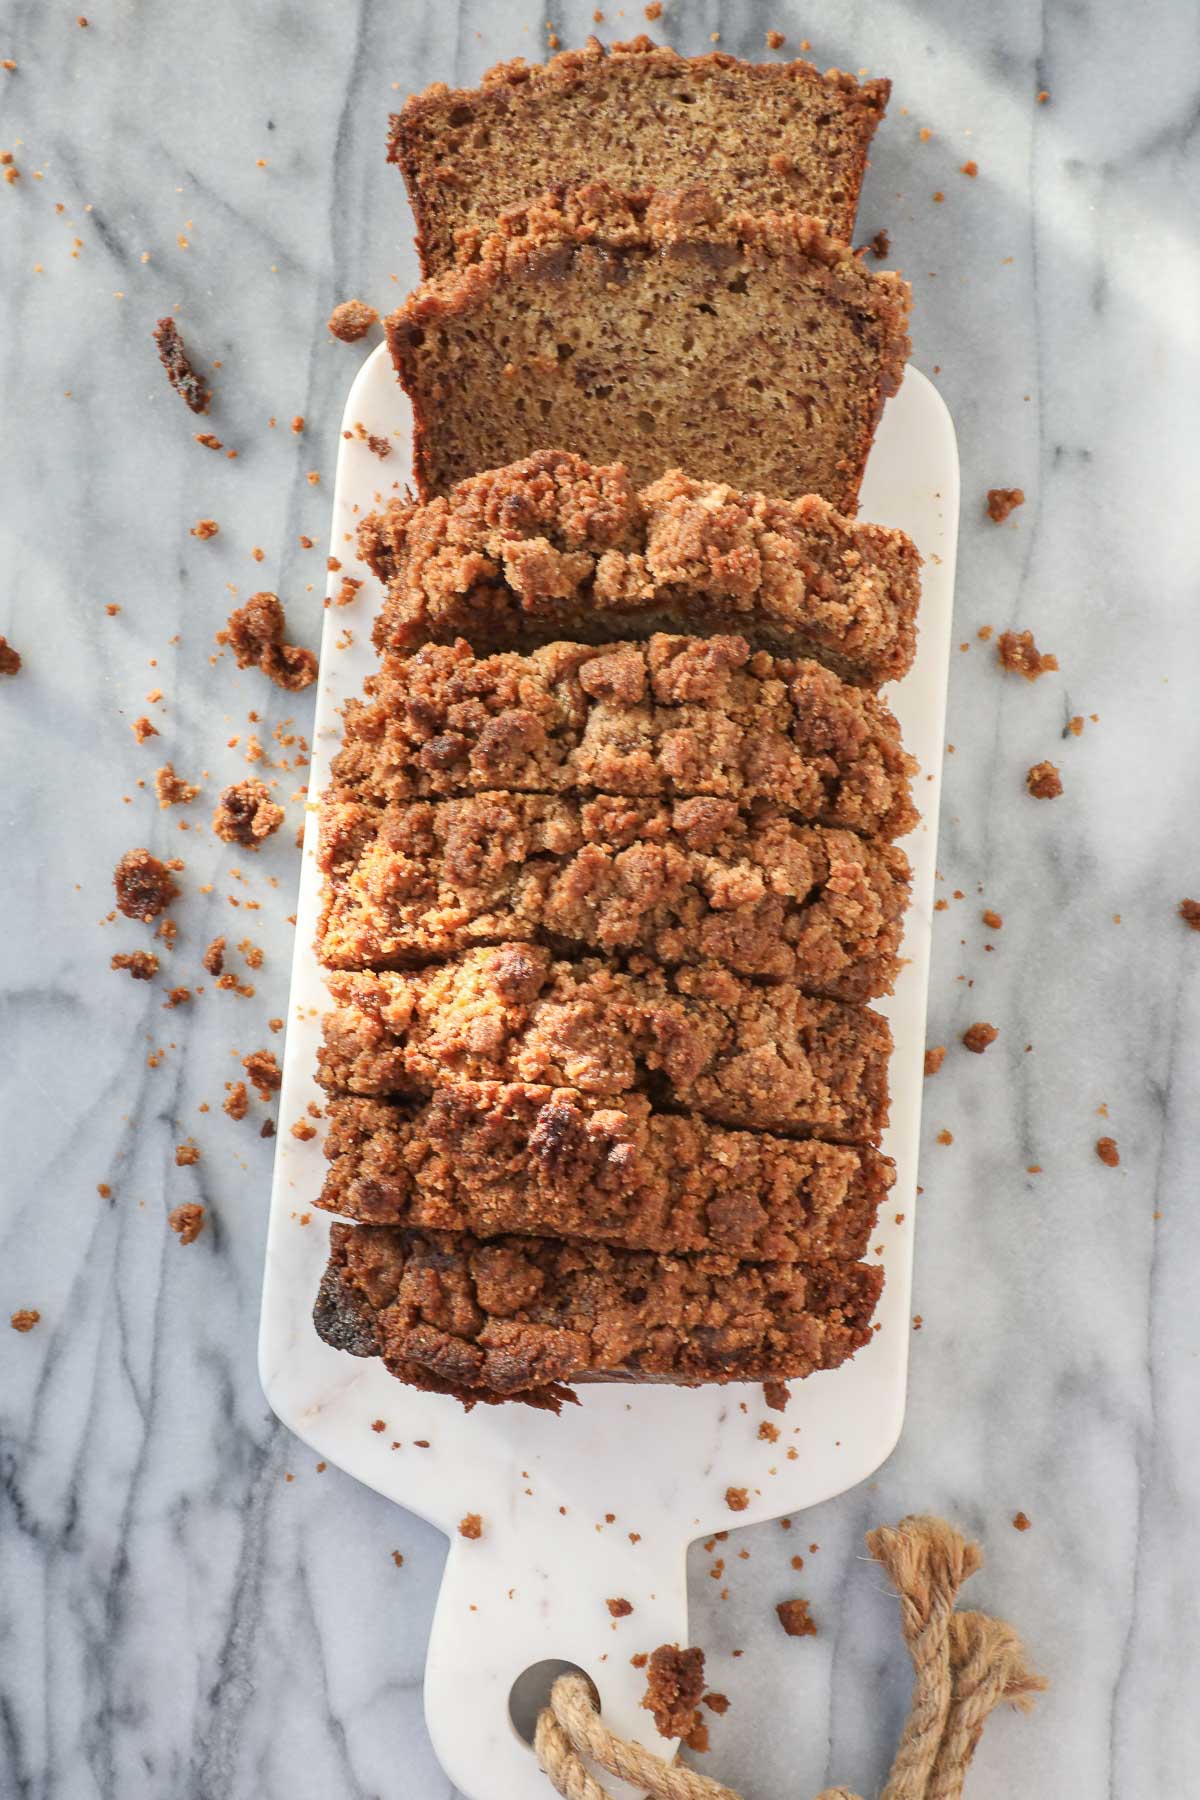 Loaf of banana bread with streusel topping sliced into thick slices on a white serving board.